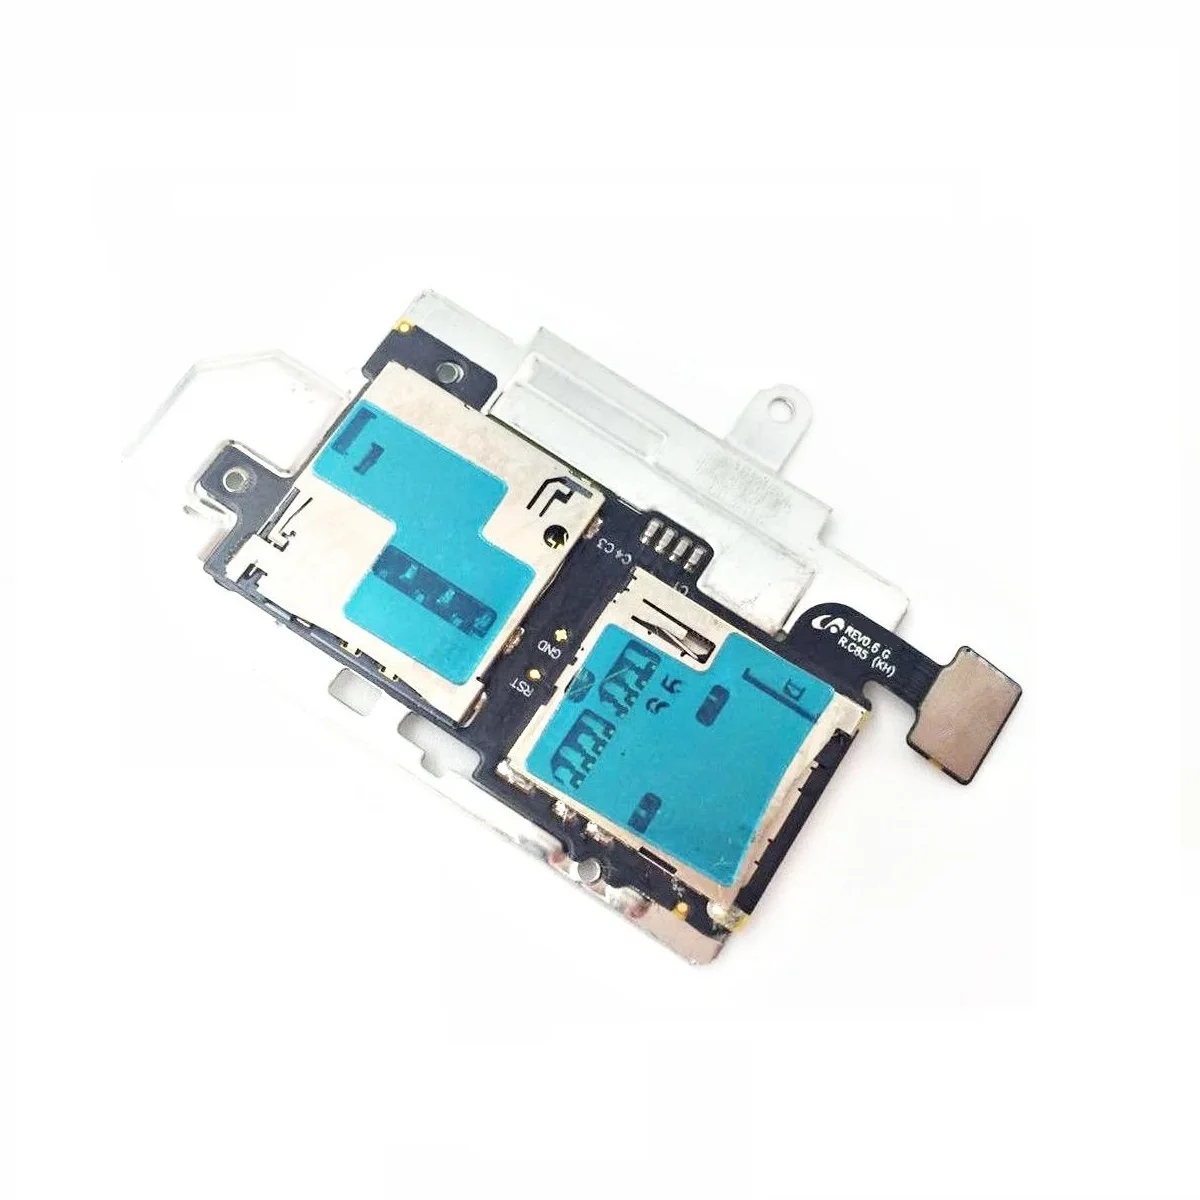 

5pcs/lot For Samsung Galaxy S3 GT-I9300 I9305 I747 T999 I535 L710 SIM And MicroSD Memory Card Tray Holder Connector Flex Cable